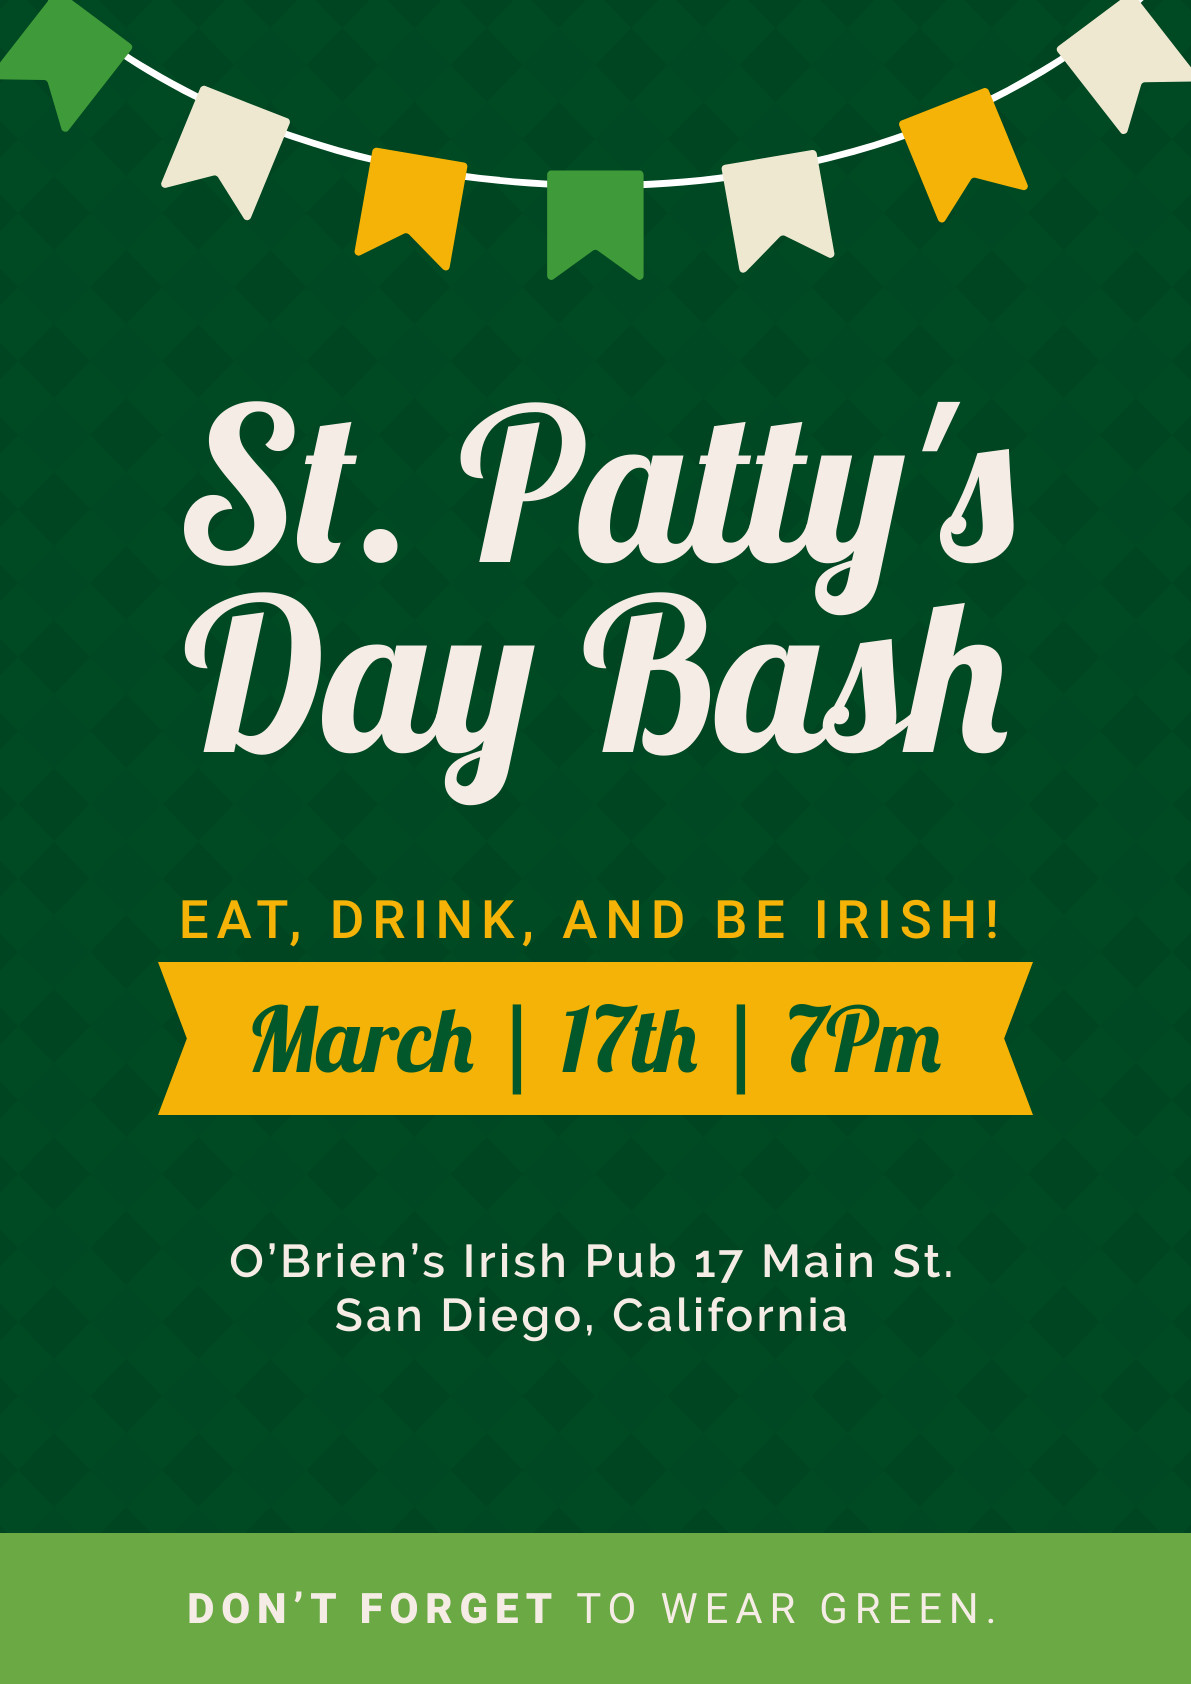 Saint Patrick's Green Day Bash –  Poster Template